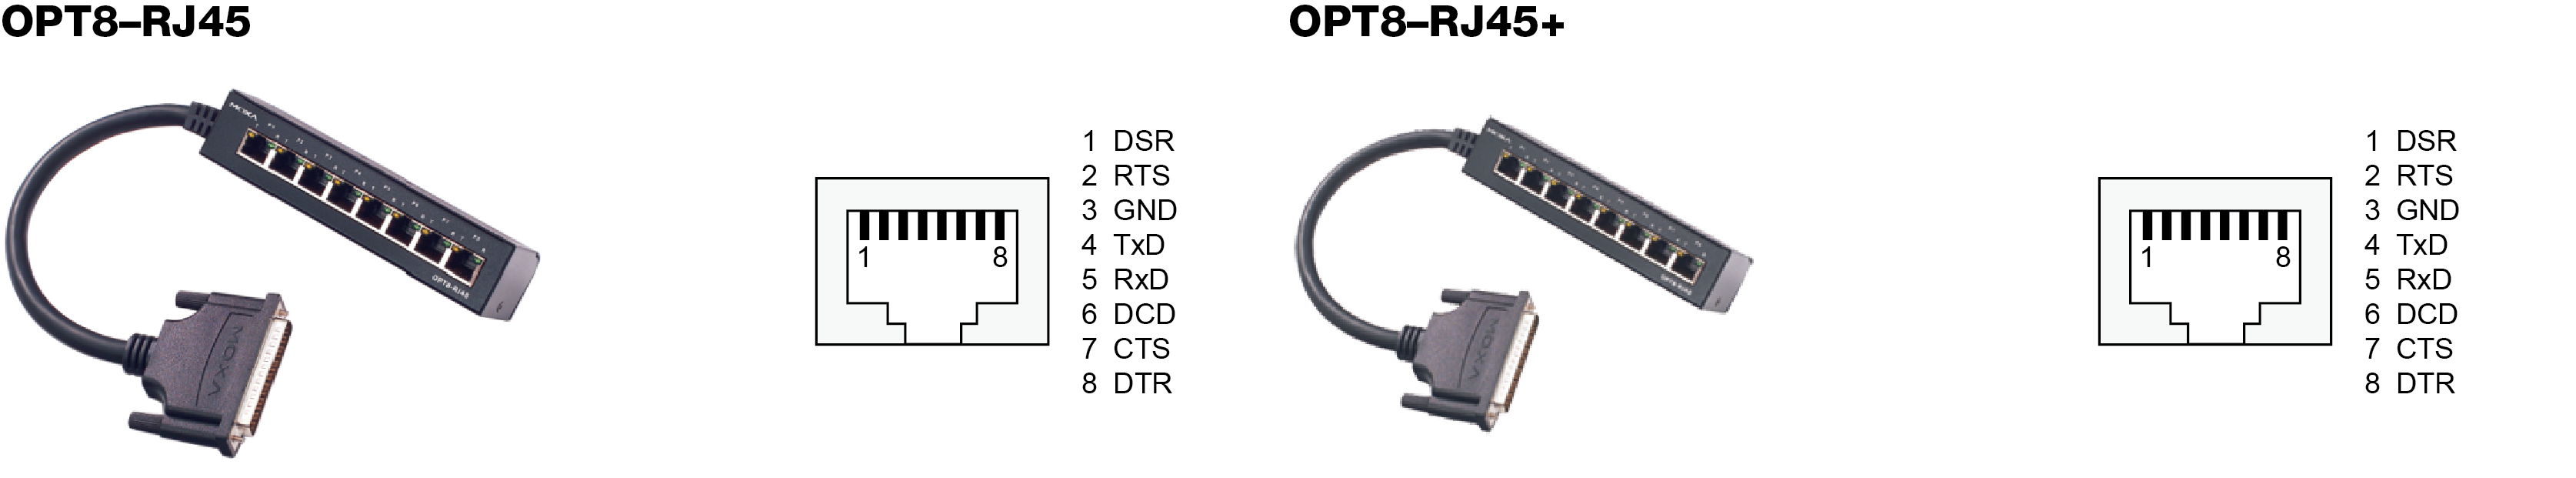 M RS-232 Connection Box to 8 x RJ45 DB62 OPT8-RJ45 8-pin Details about   MOXA 